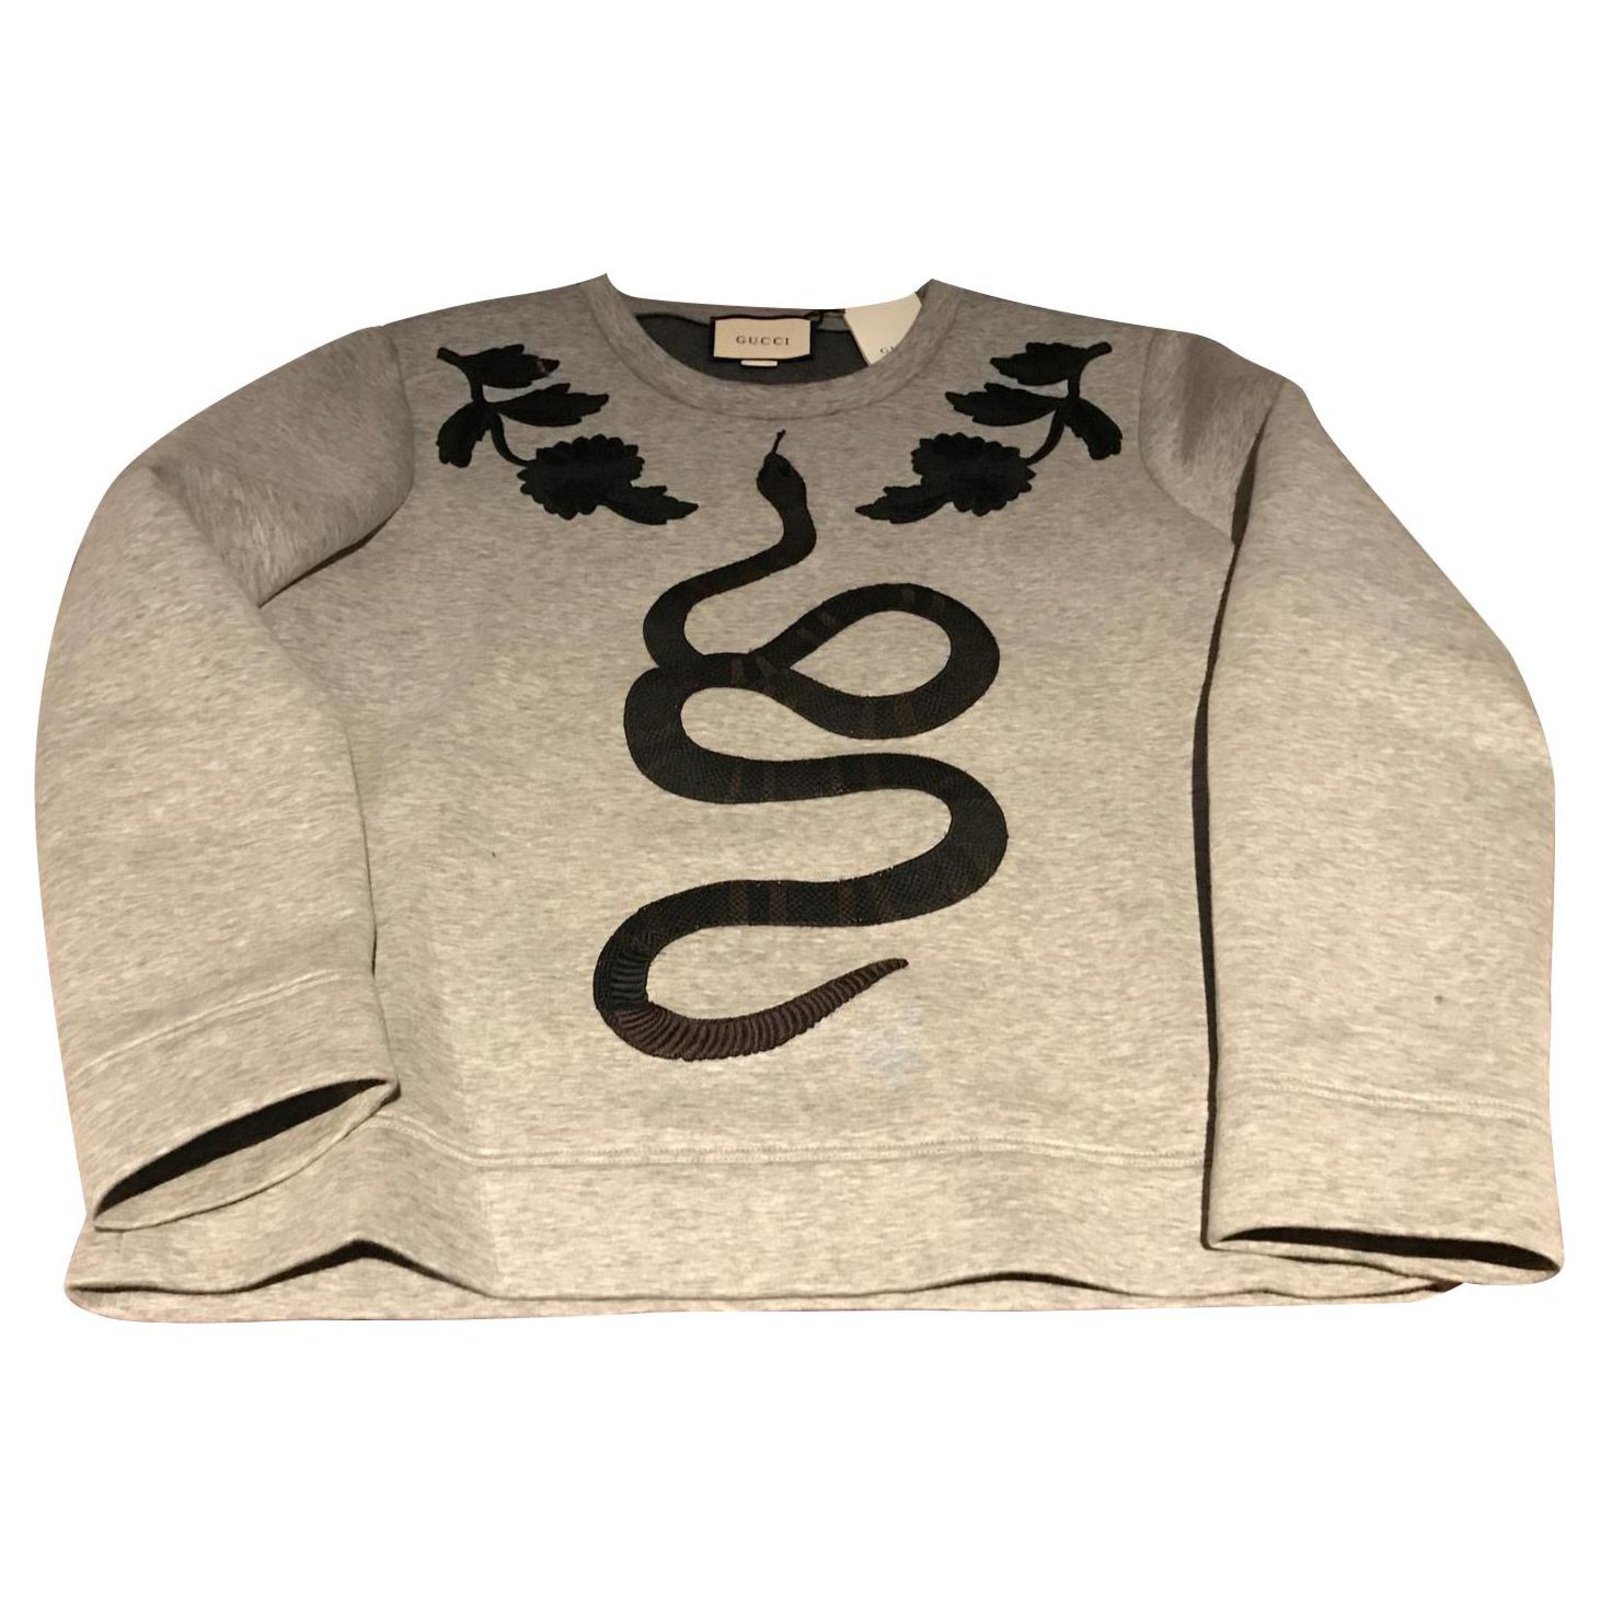 gucci snake pullover